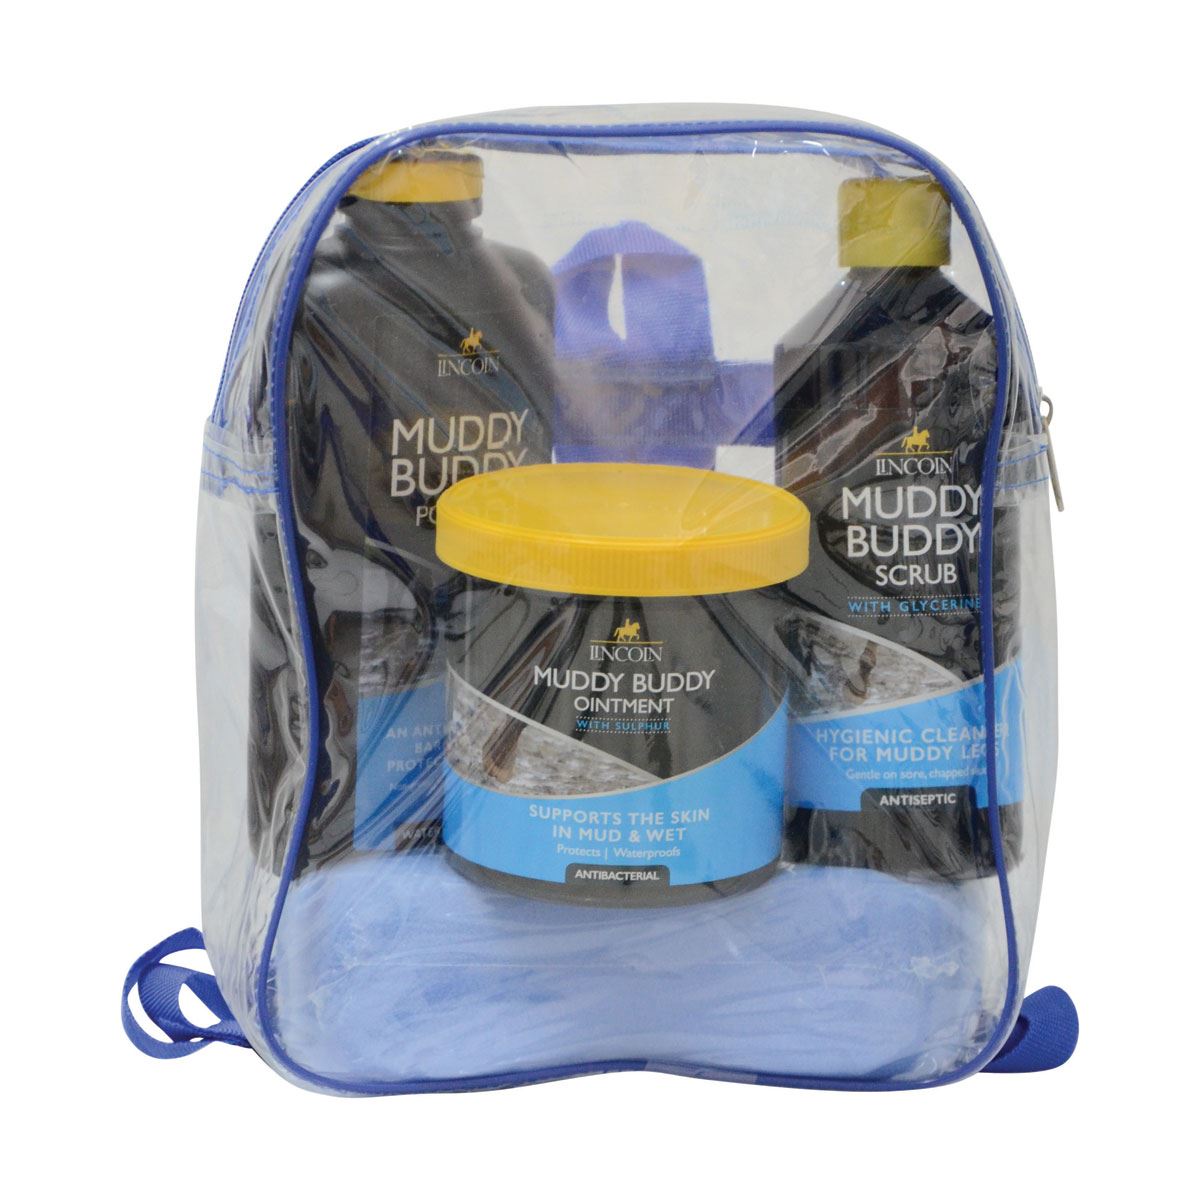 Lincoln Limited Edition Muddy Buddy Gift Pack - Just Horse Riders